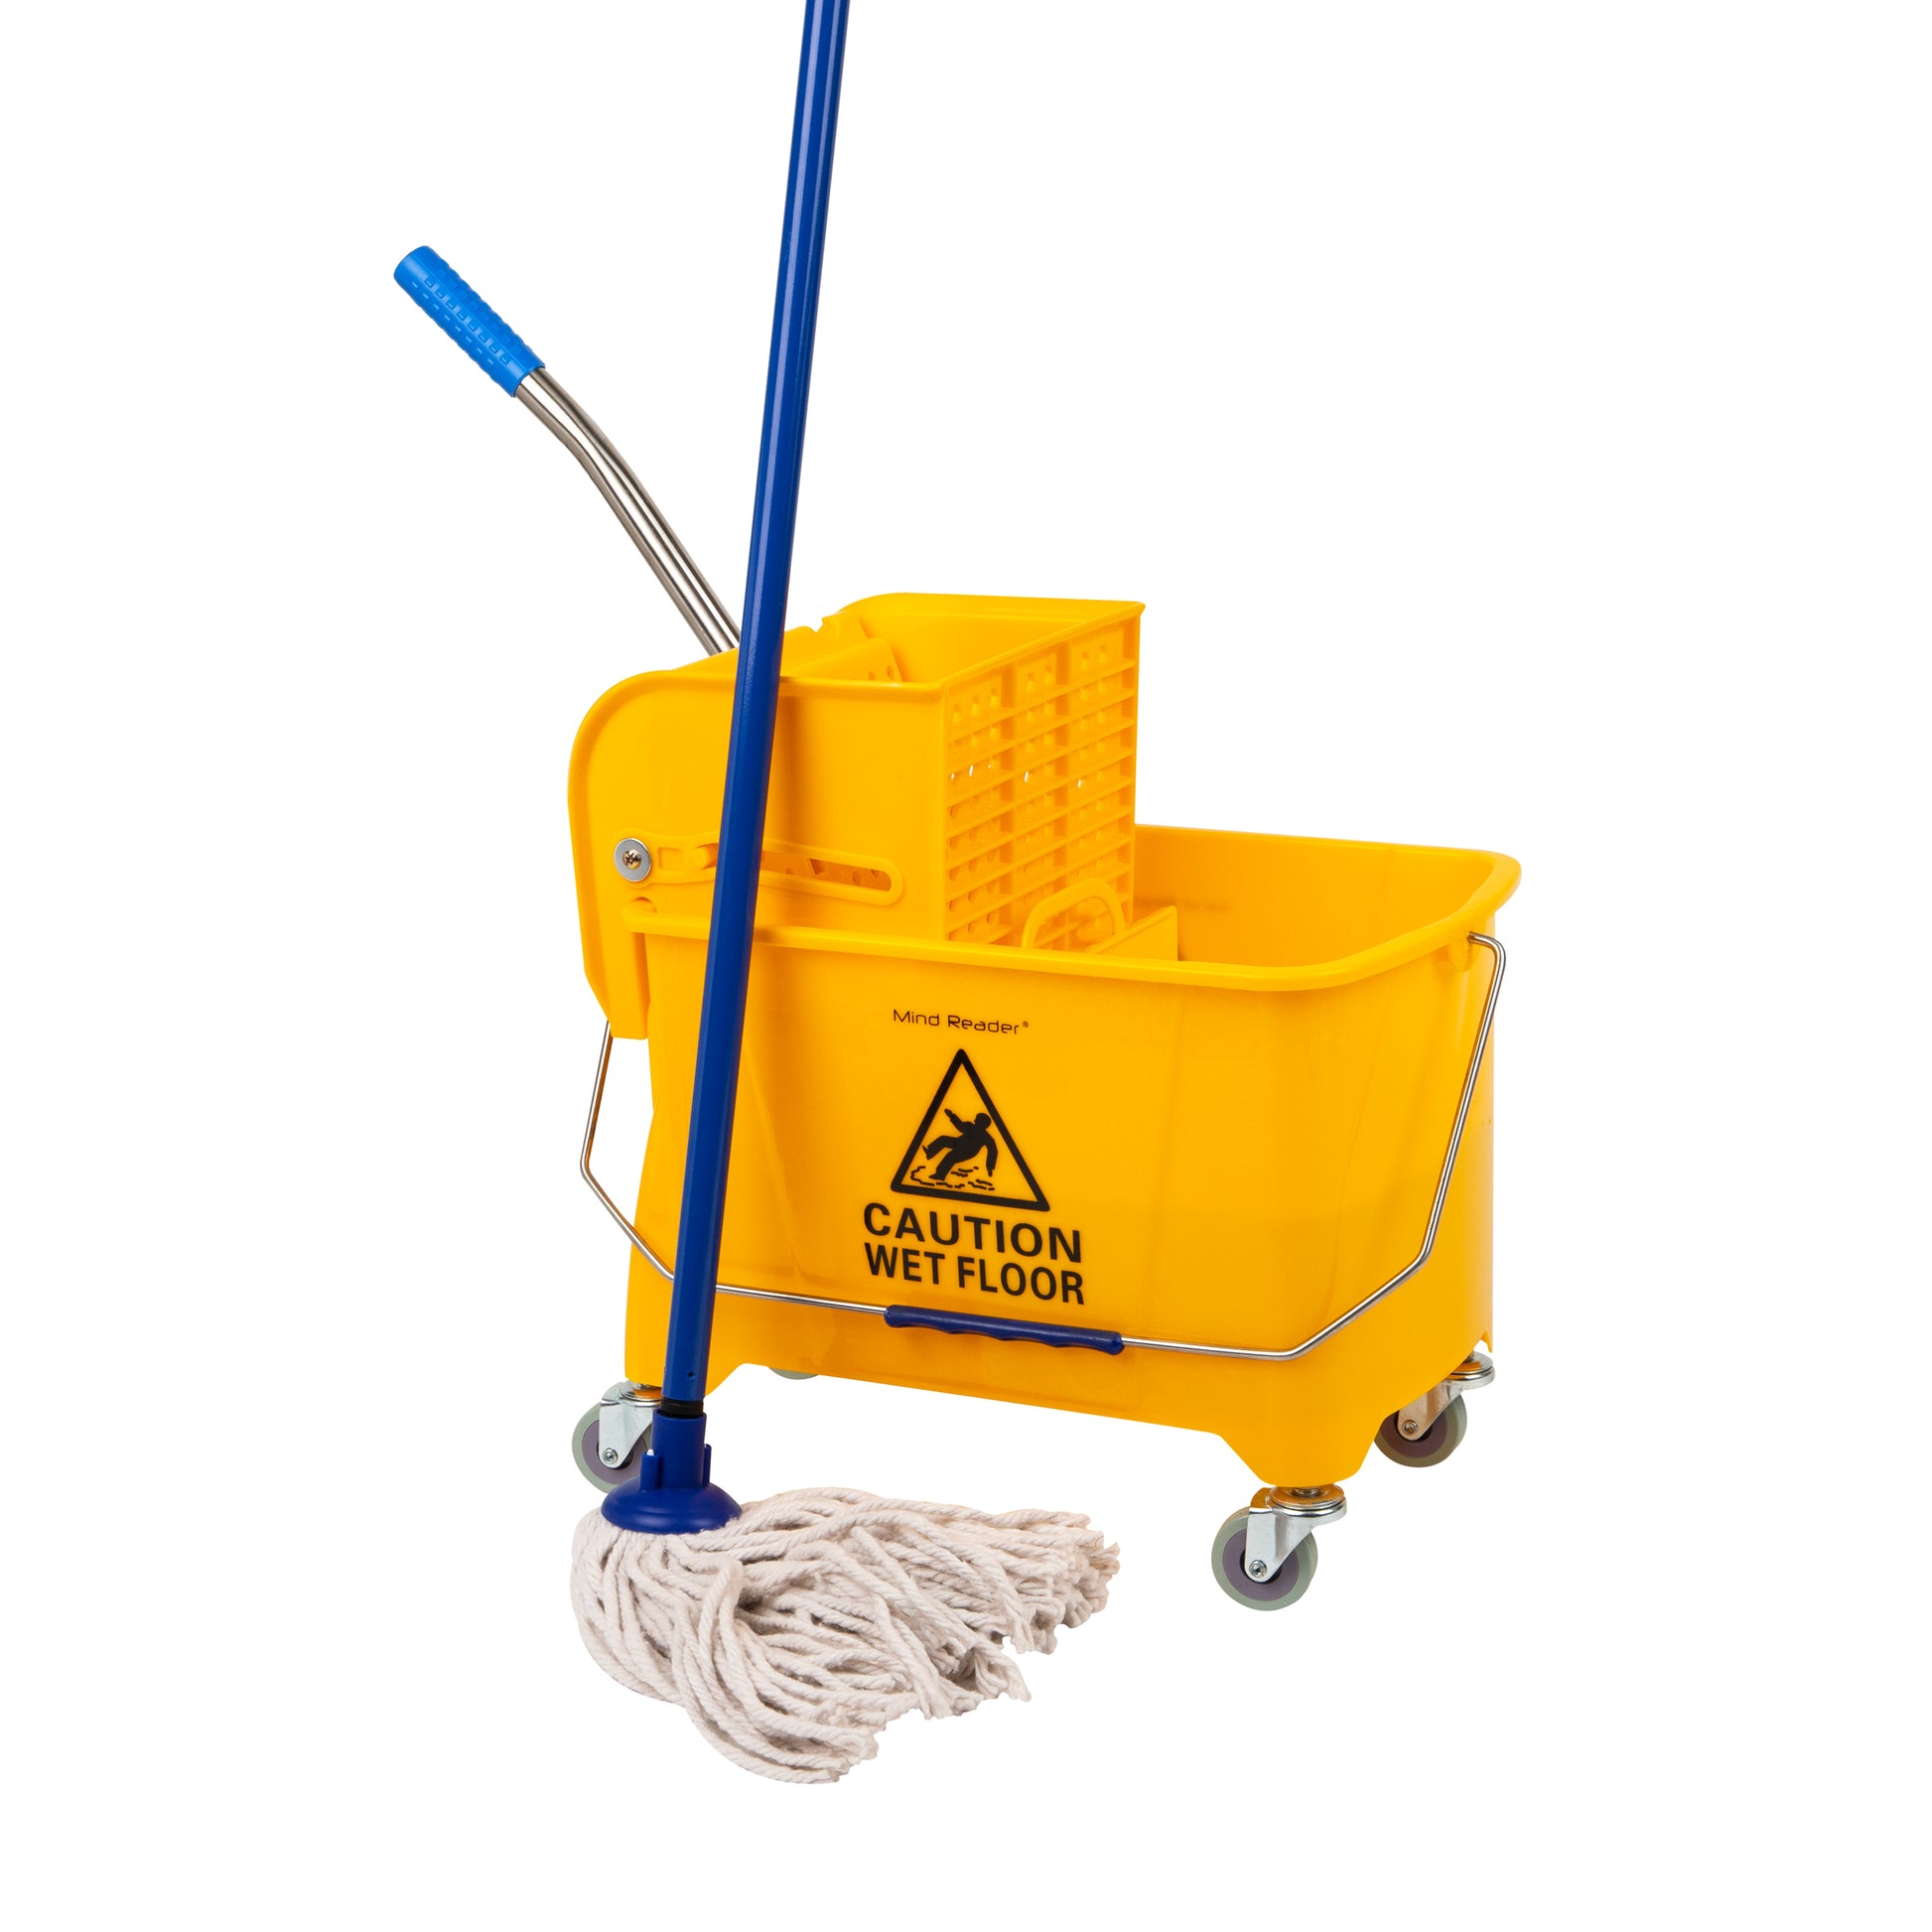  Movable Commercial Stainless Steel Mop Rack,Mop and